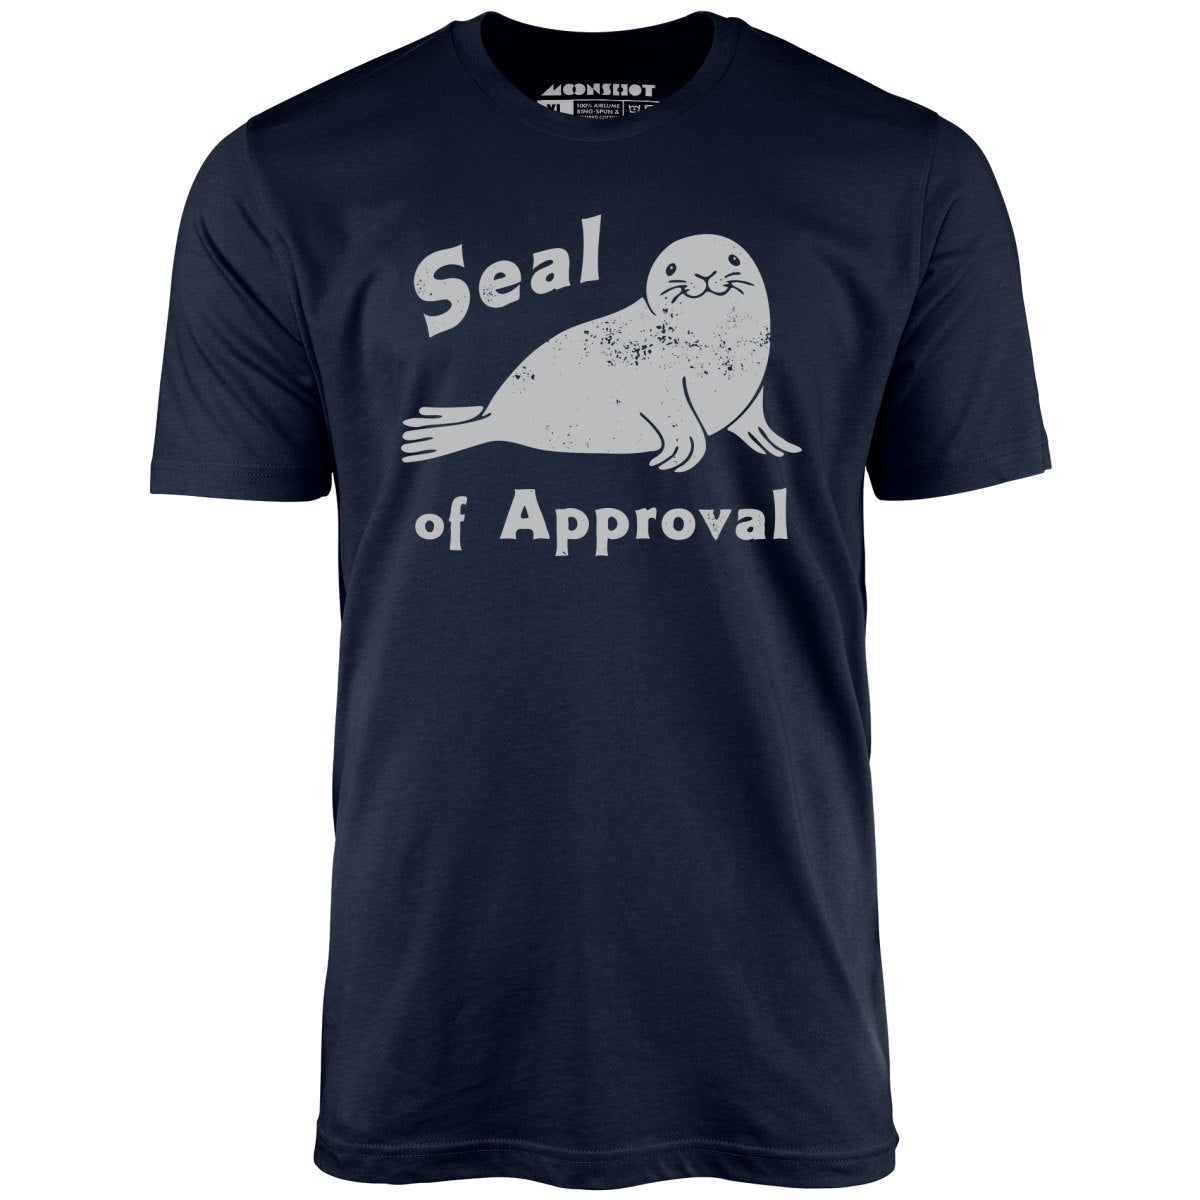 Seal of Approval - Unisex T-Shirt